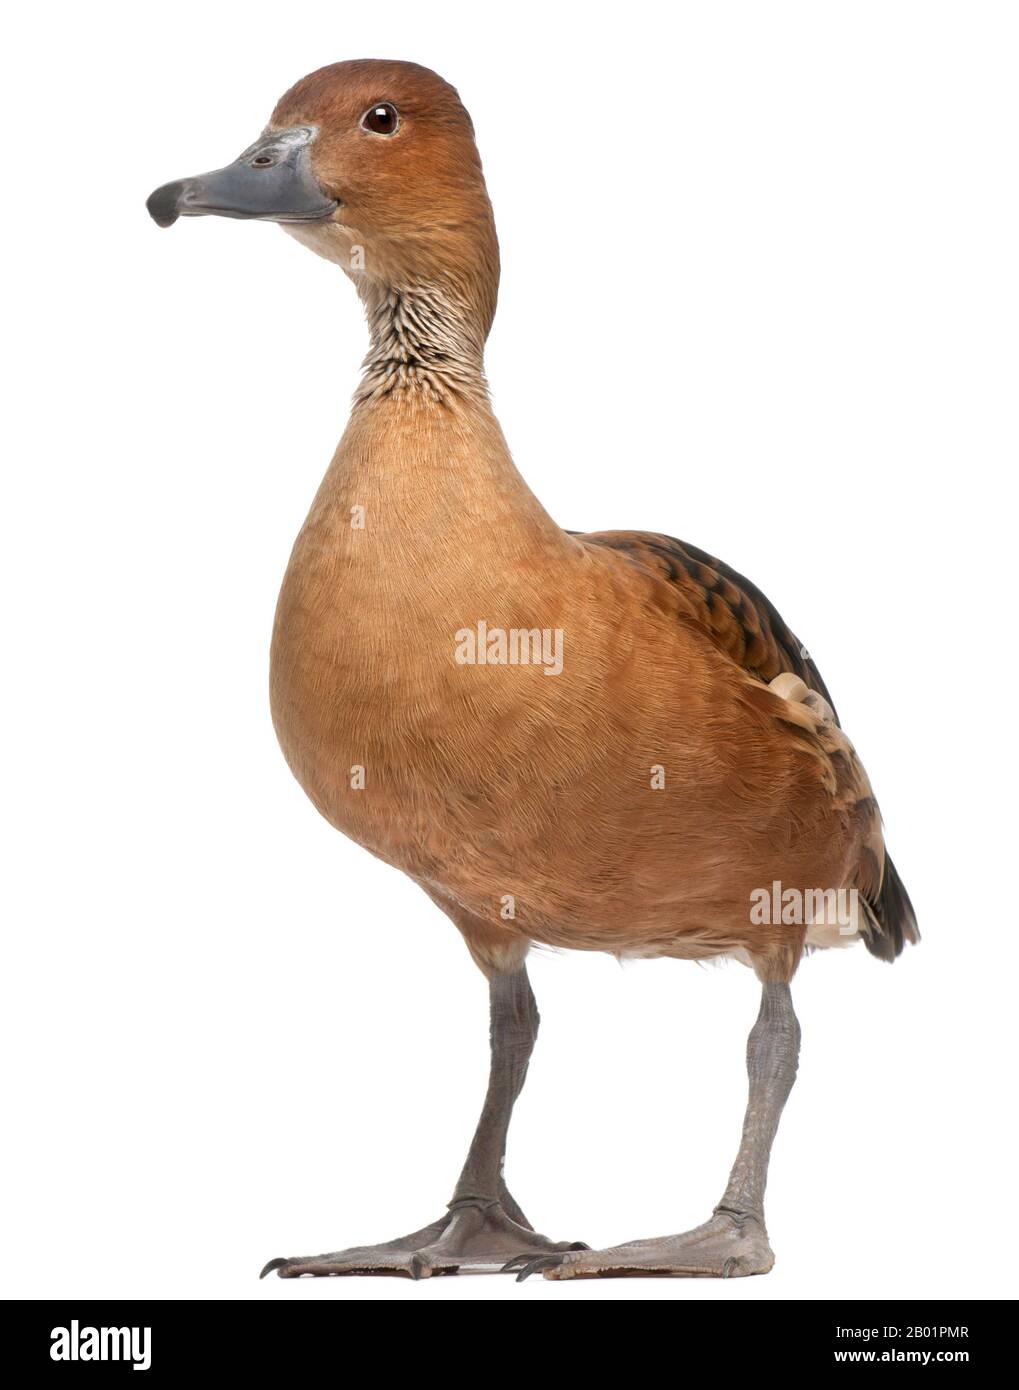 Fulvous Whistling Duck, Dendrocygna bicolor, 5 years old, standing in front of white background Stock Photo